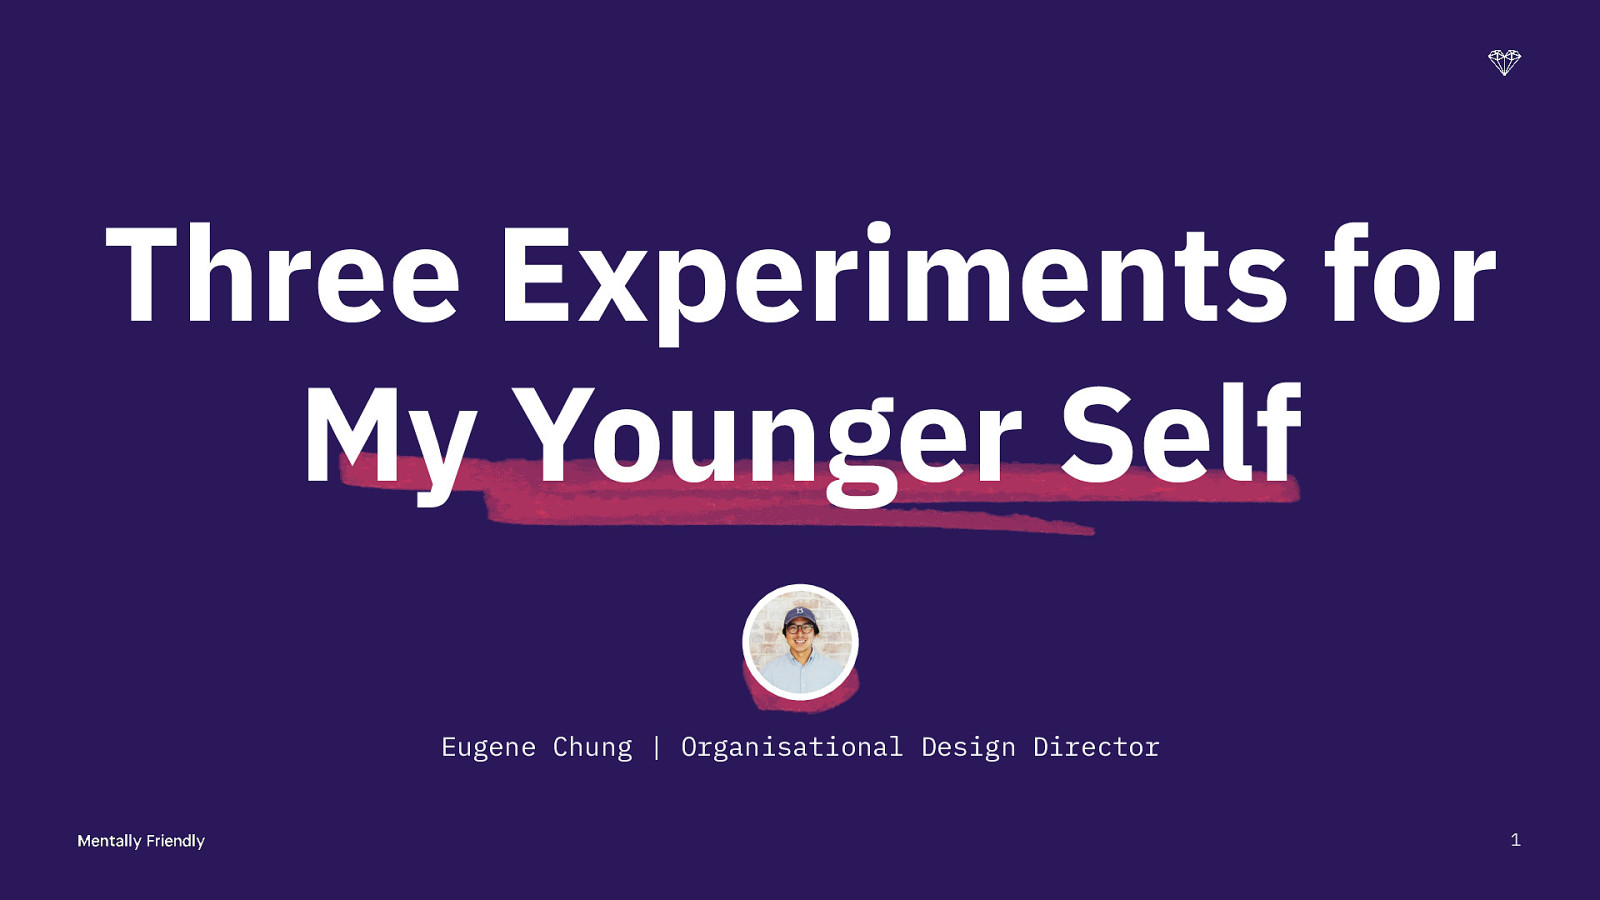 Three Experiments for My Younger Self